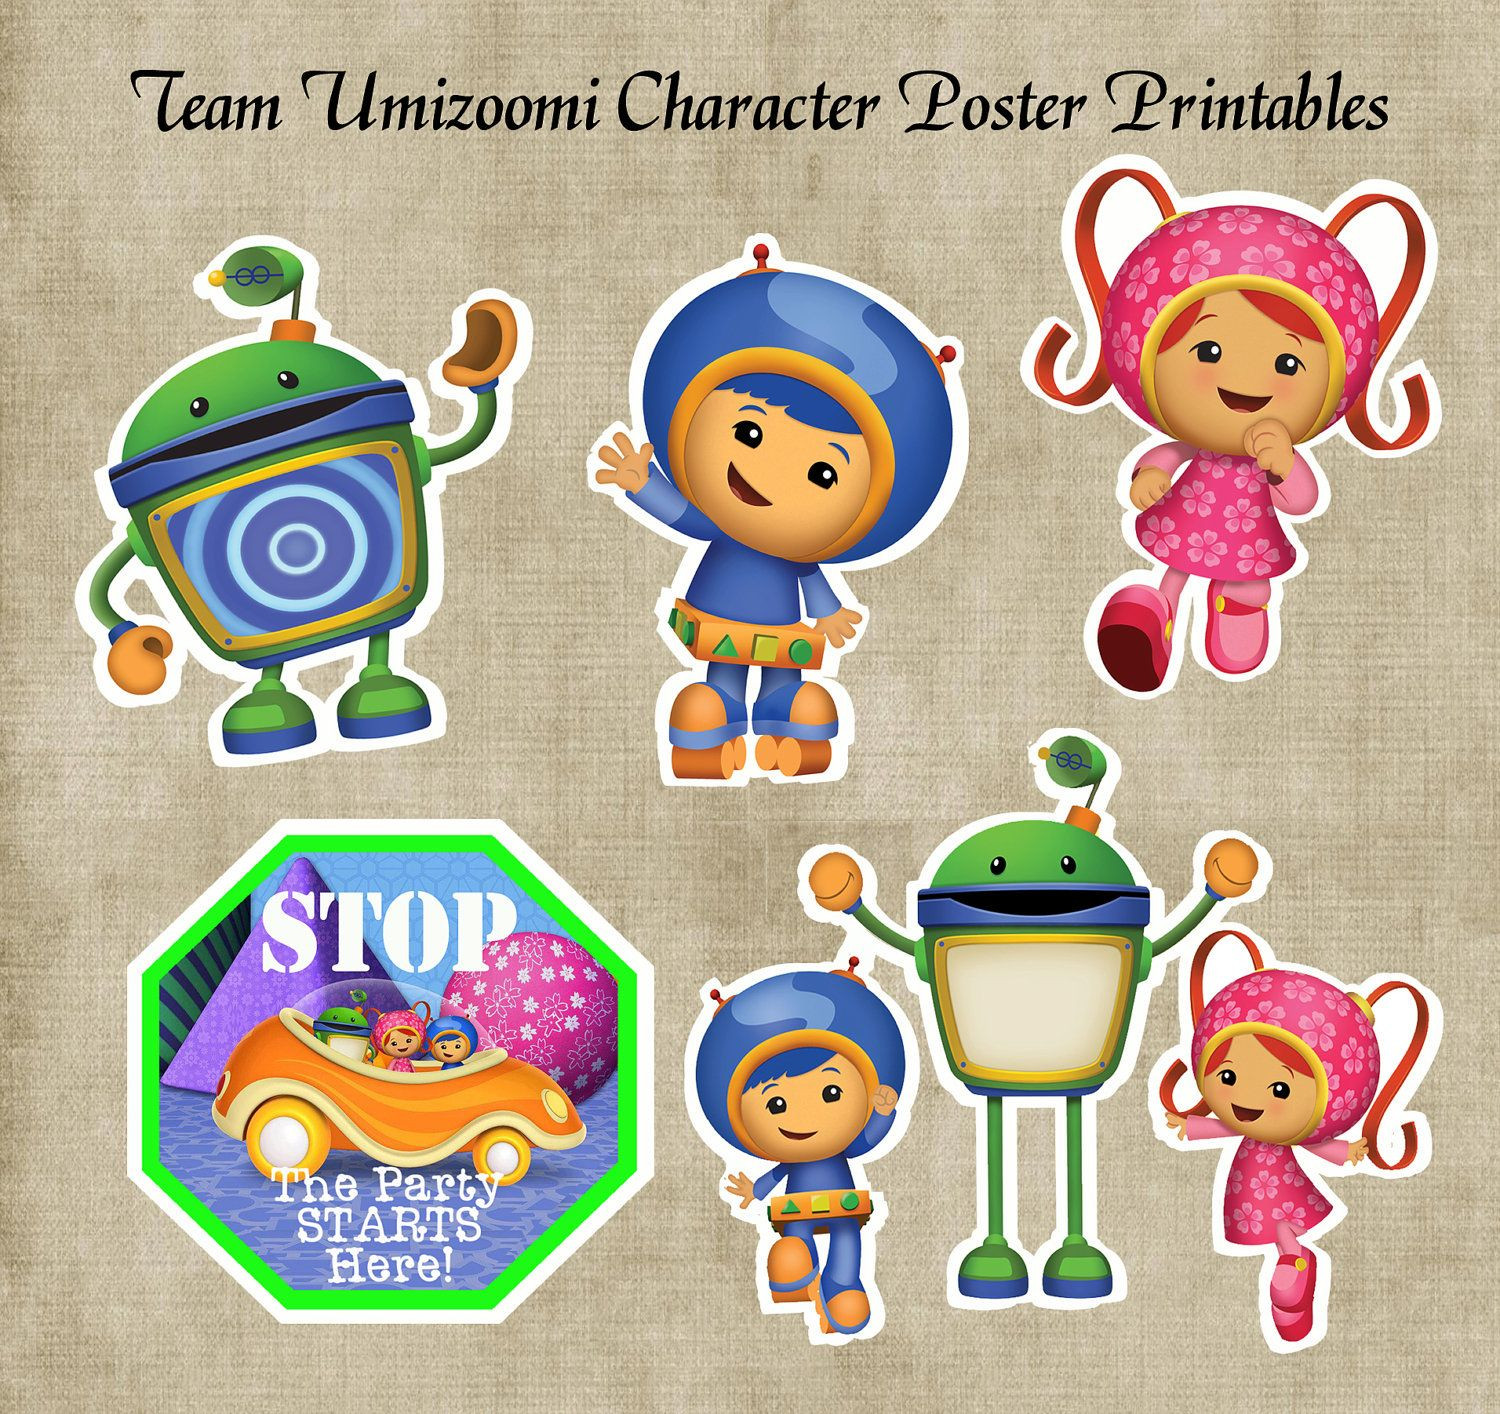 Team Umizoomi Birthday Decorations
 Team Umizoomi Character Posters & Door Sign Birthday Party